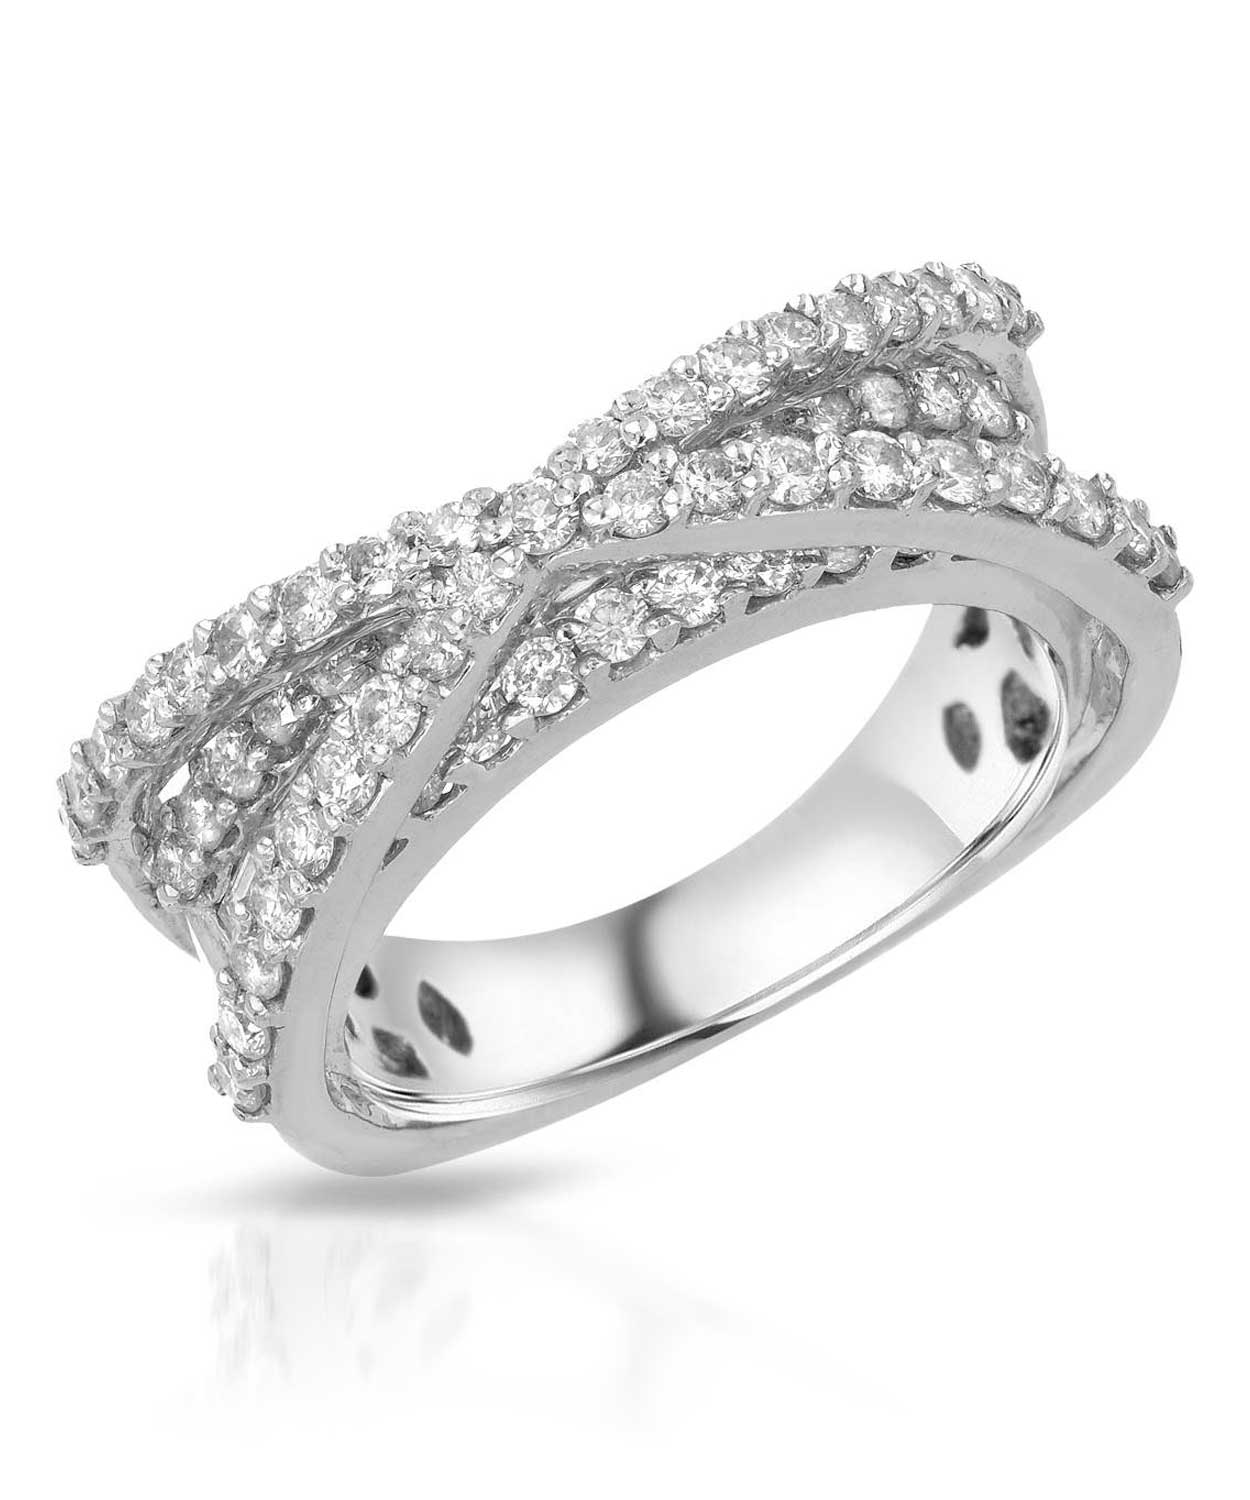 Signature Collection 1.60 ctw Diamond 18k White Gold Intertwined Ring View 1